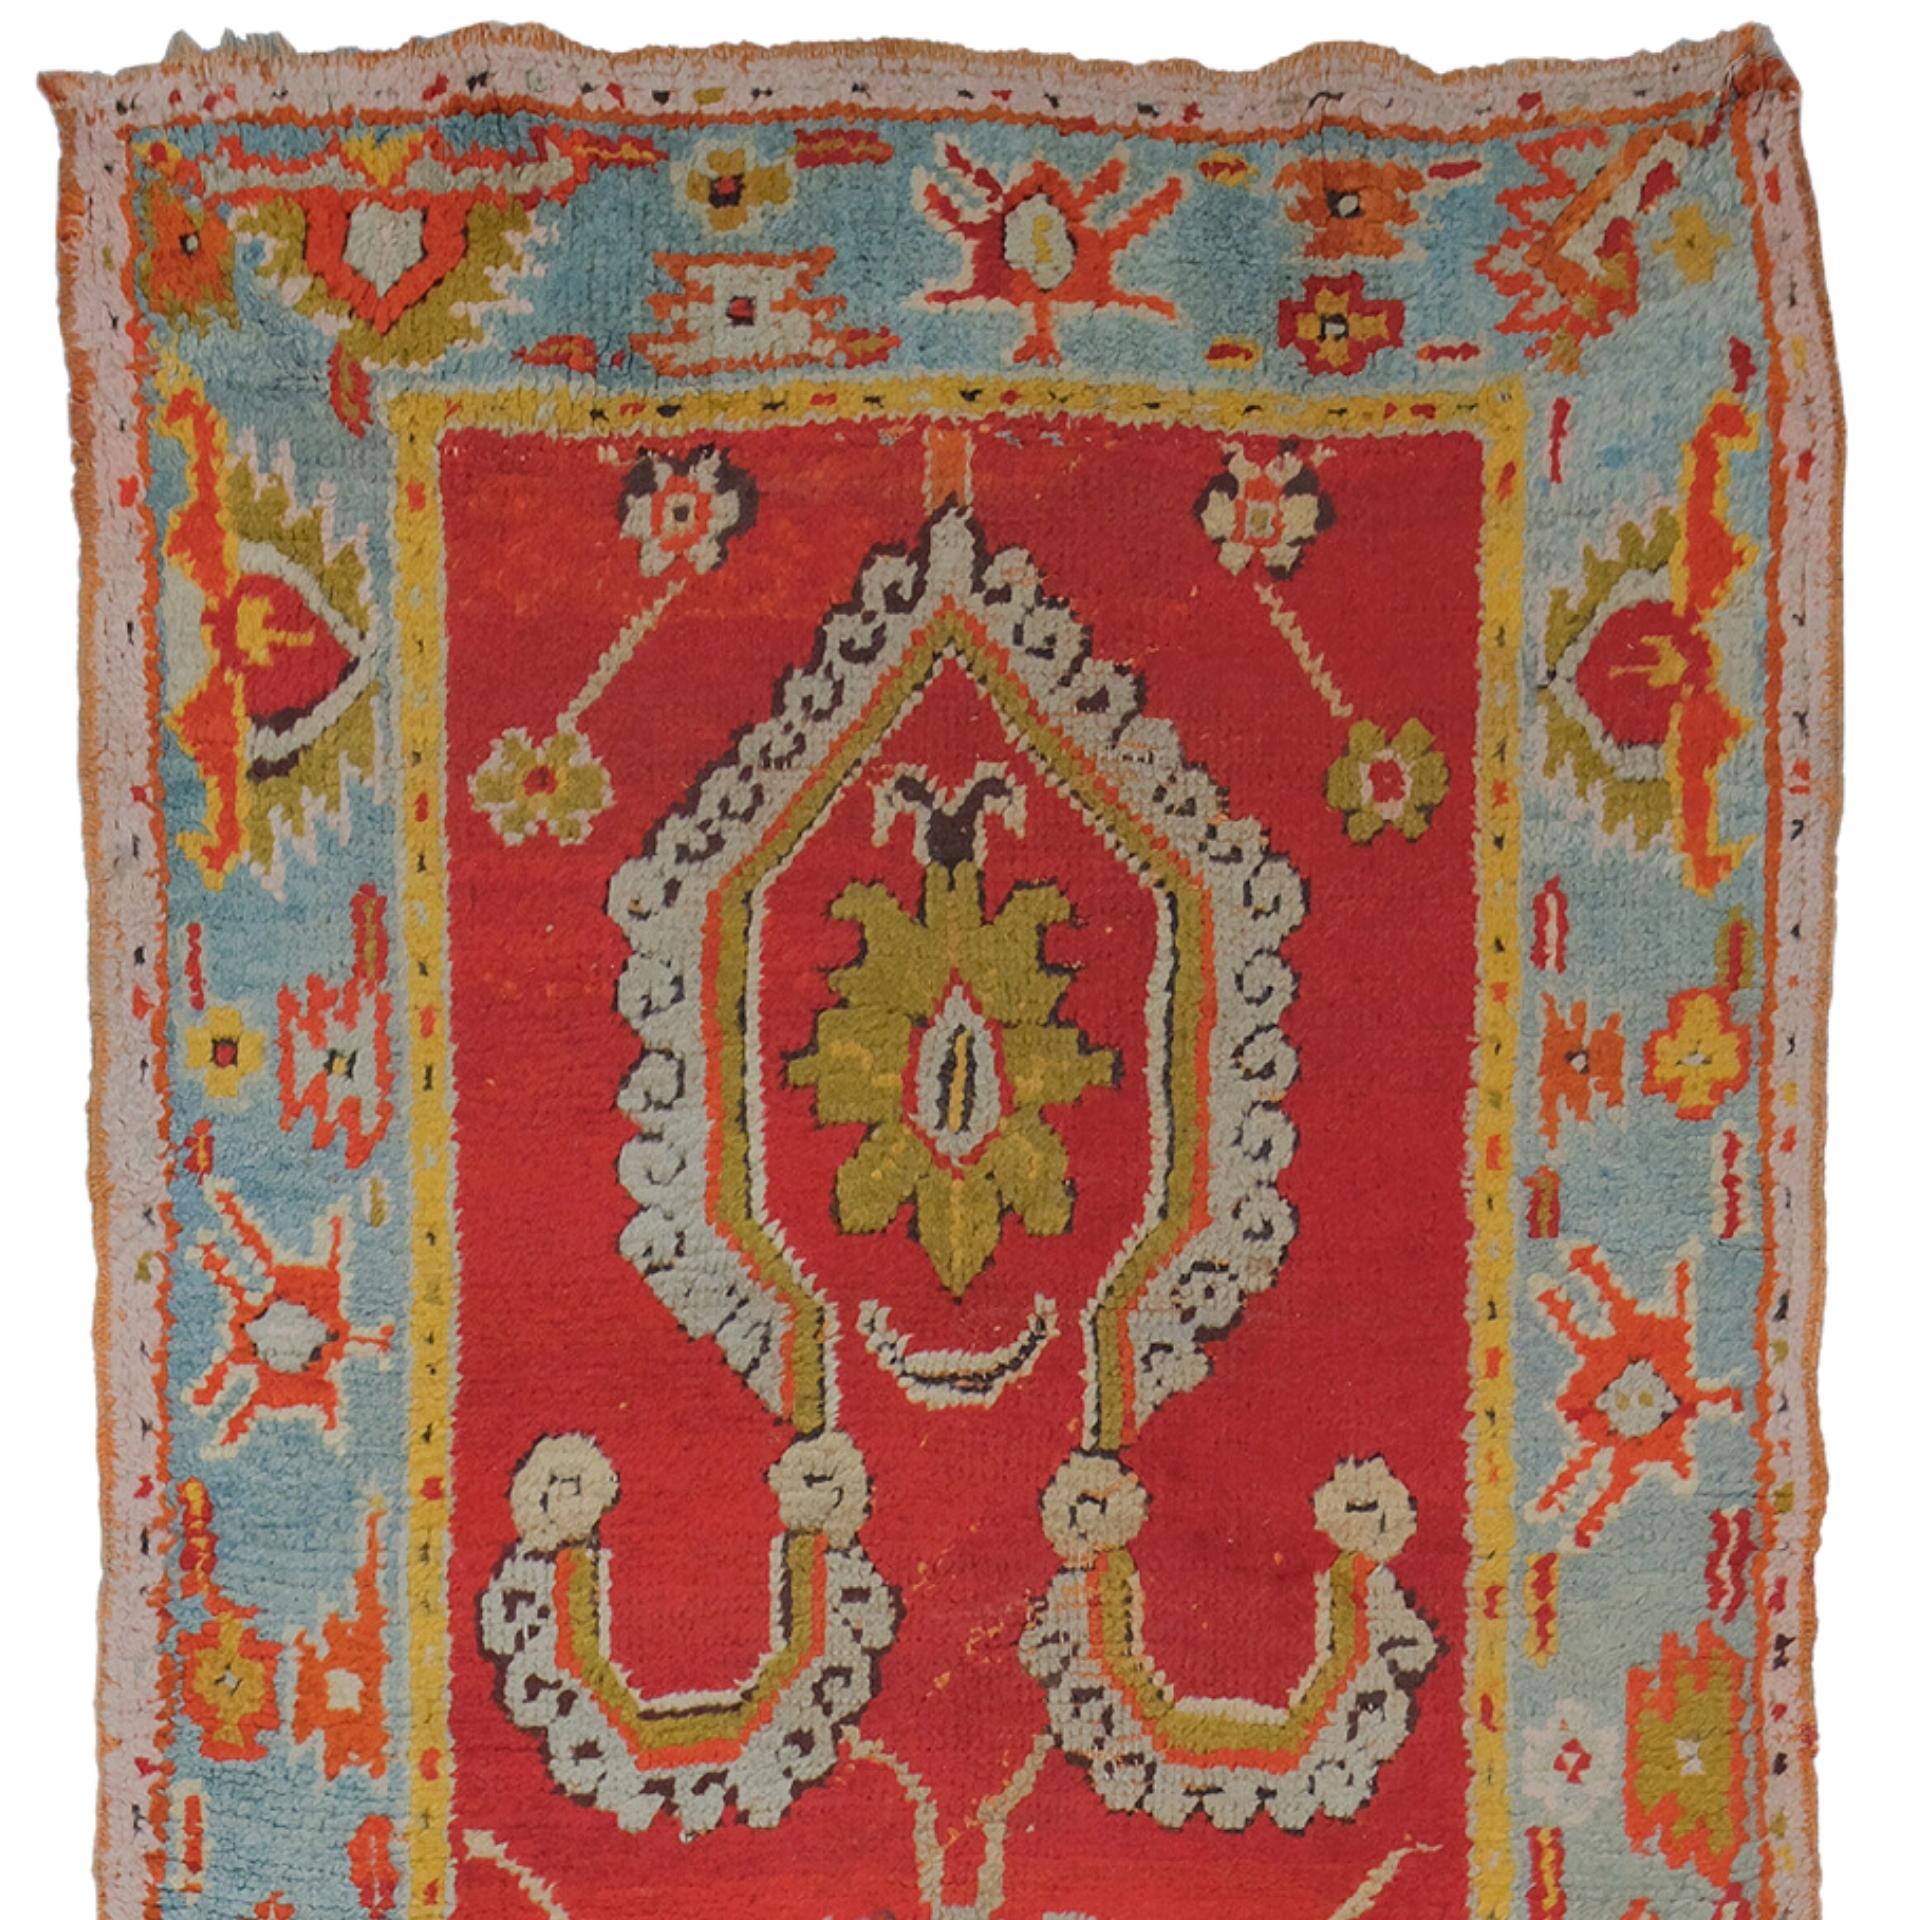 Antique Ushak Rug - 19th Century Ushak Runner

This antique Ushak carpet brings the elegance and sophisticated design of the Ottoman period to your home. This hand-woven rug in rich red and blue tones is eye-catching with its carefully crafted